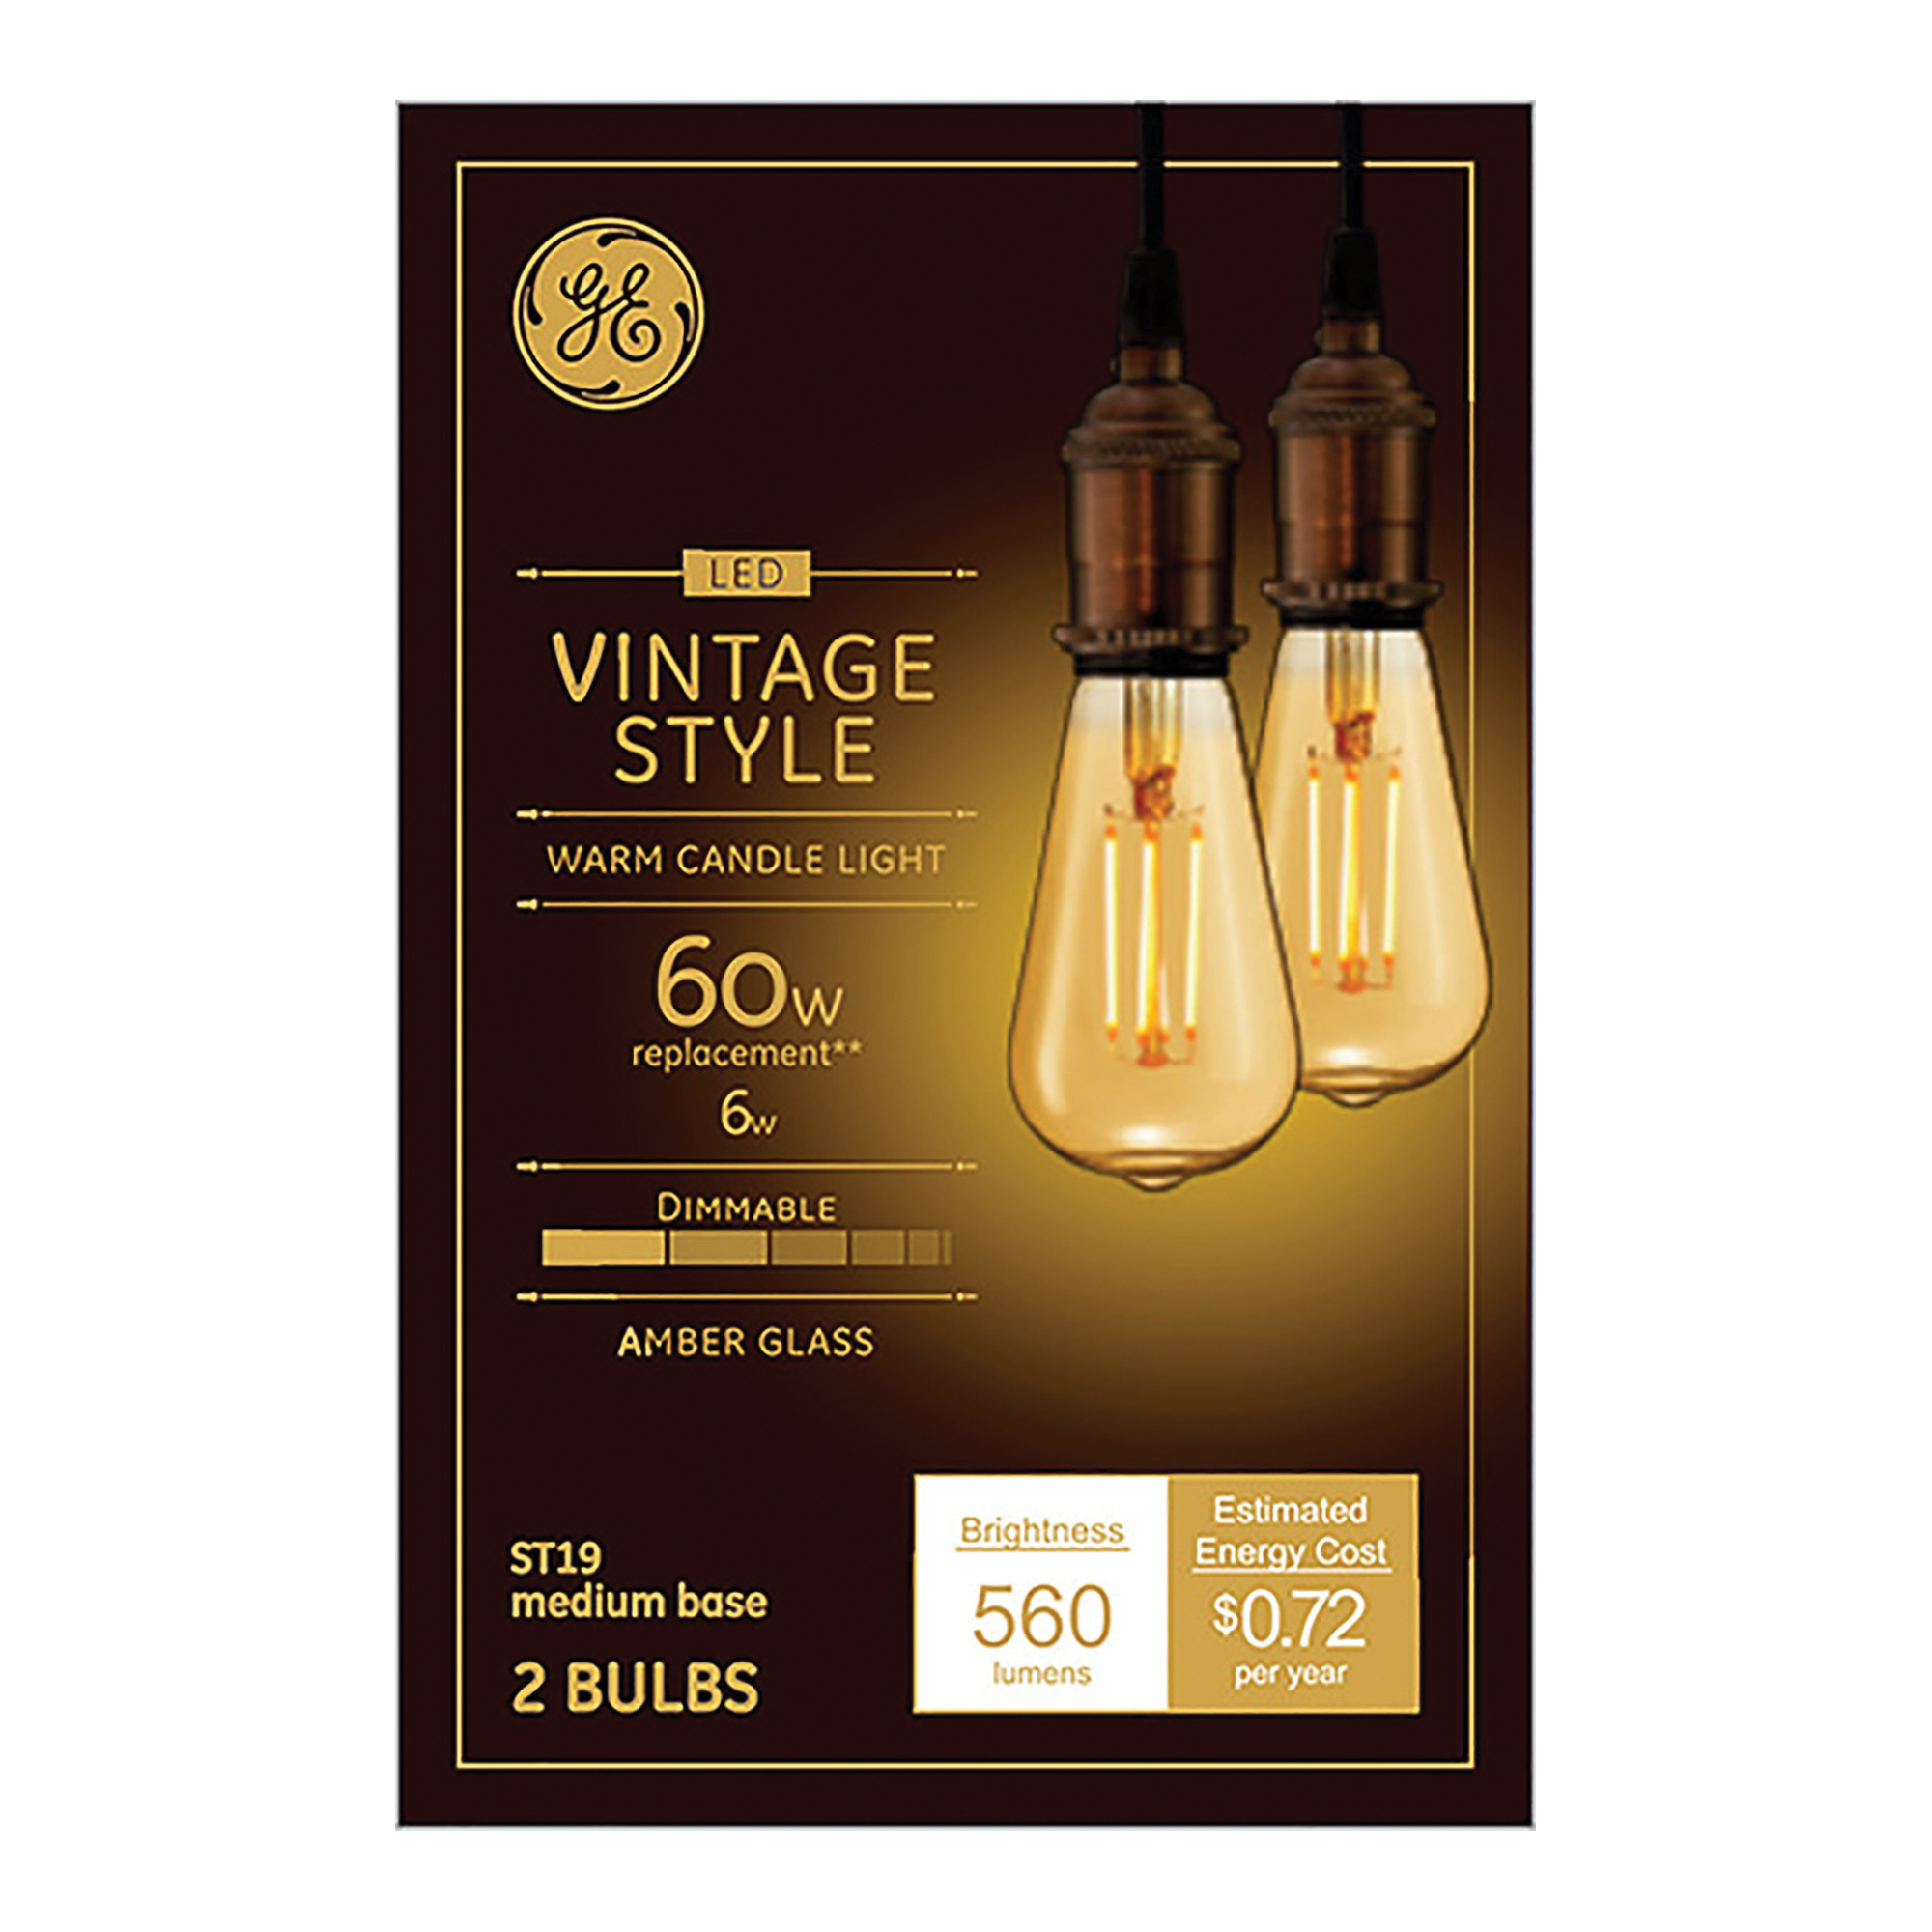 42200 Replacement Bulb, Decorative, Vintage, ST19 Lamp, 60 W Equivalent, Medium (E26) Lamp Base, Dimmable, Amber